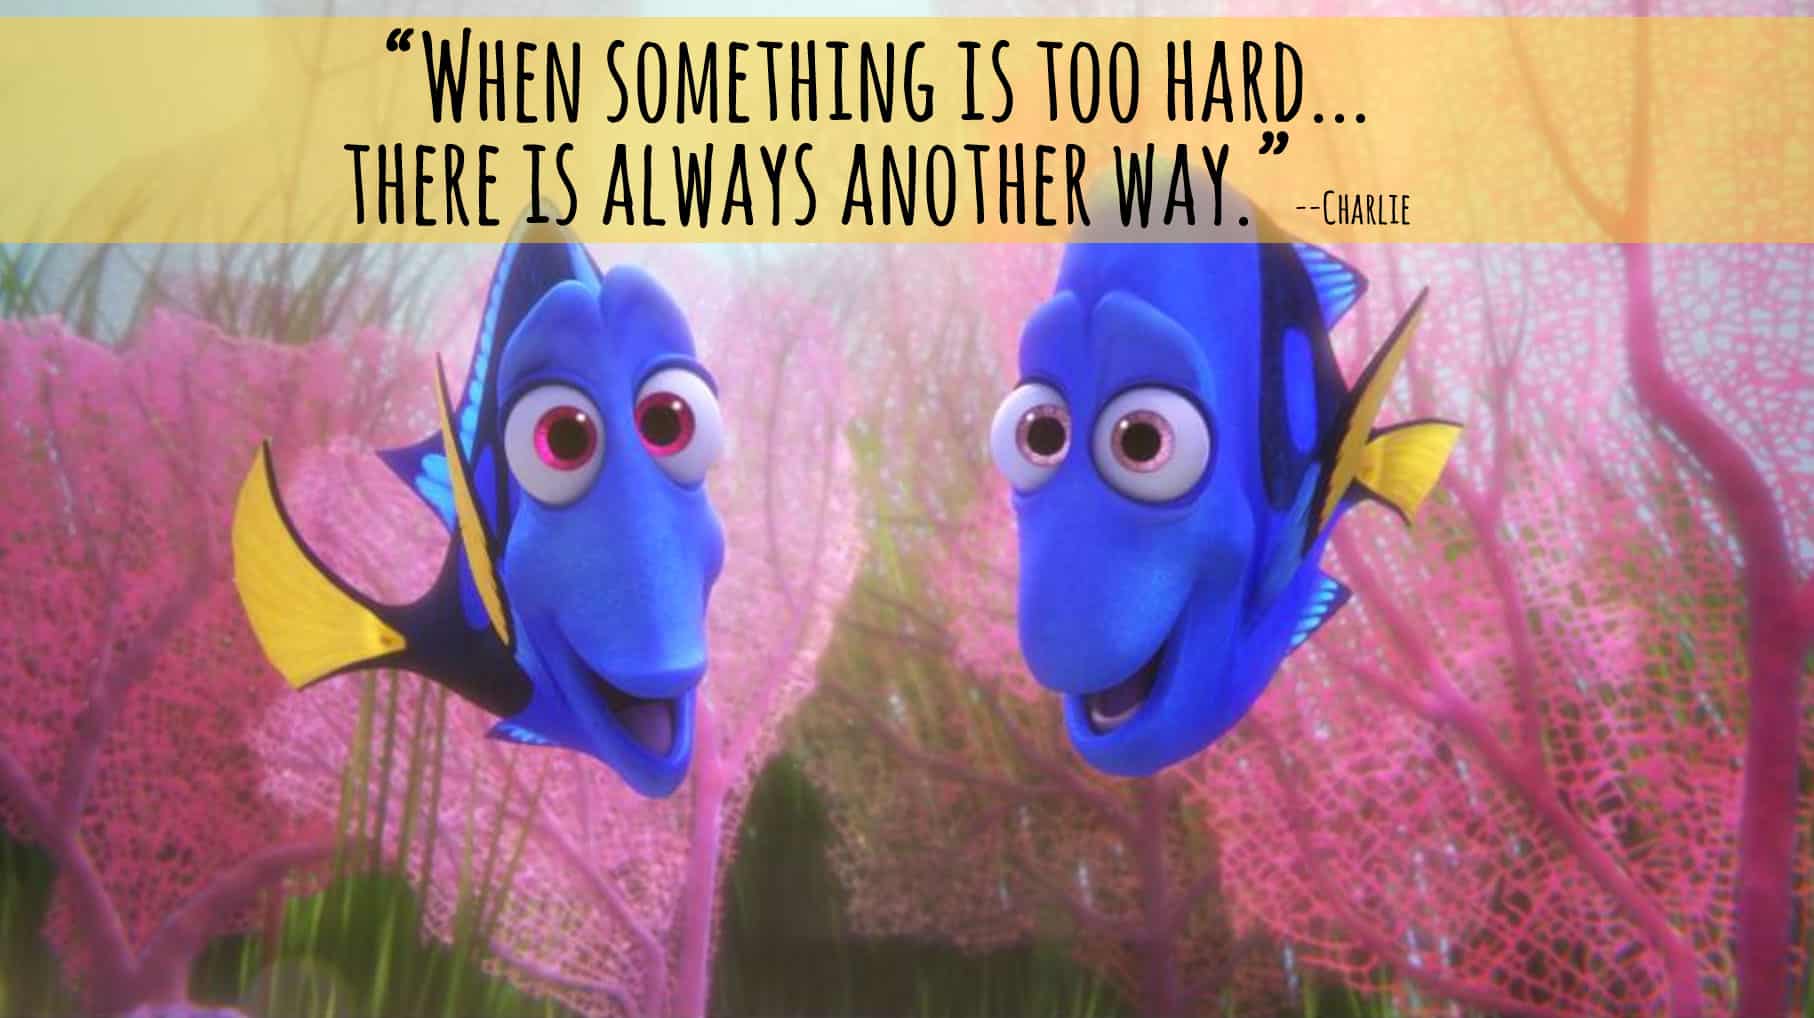 Finding Dory Quotes - Entire LIST of the BEST movie lines in the movie! "When something is too hard there is always another way."